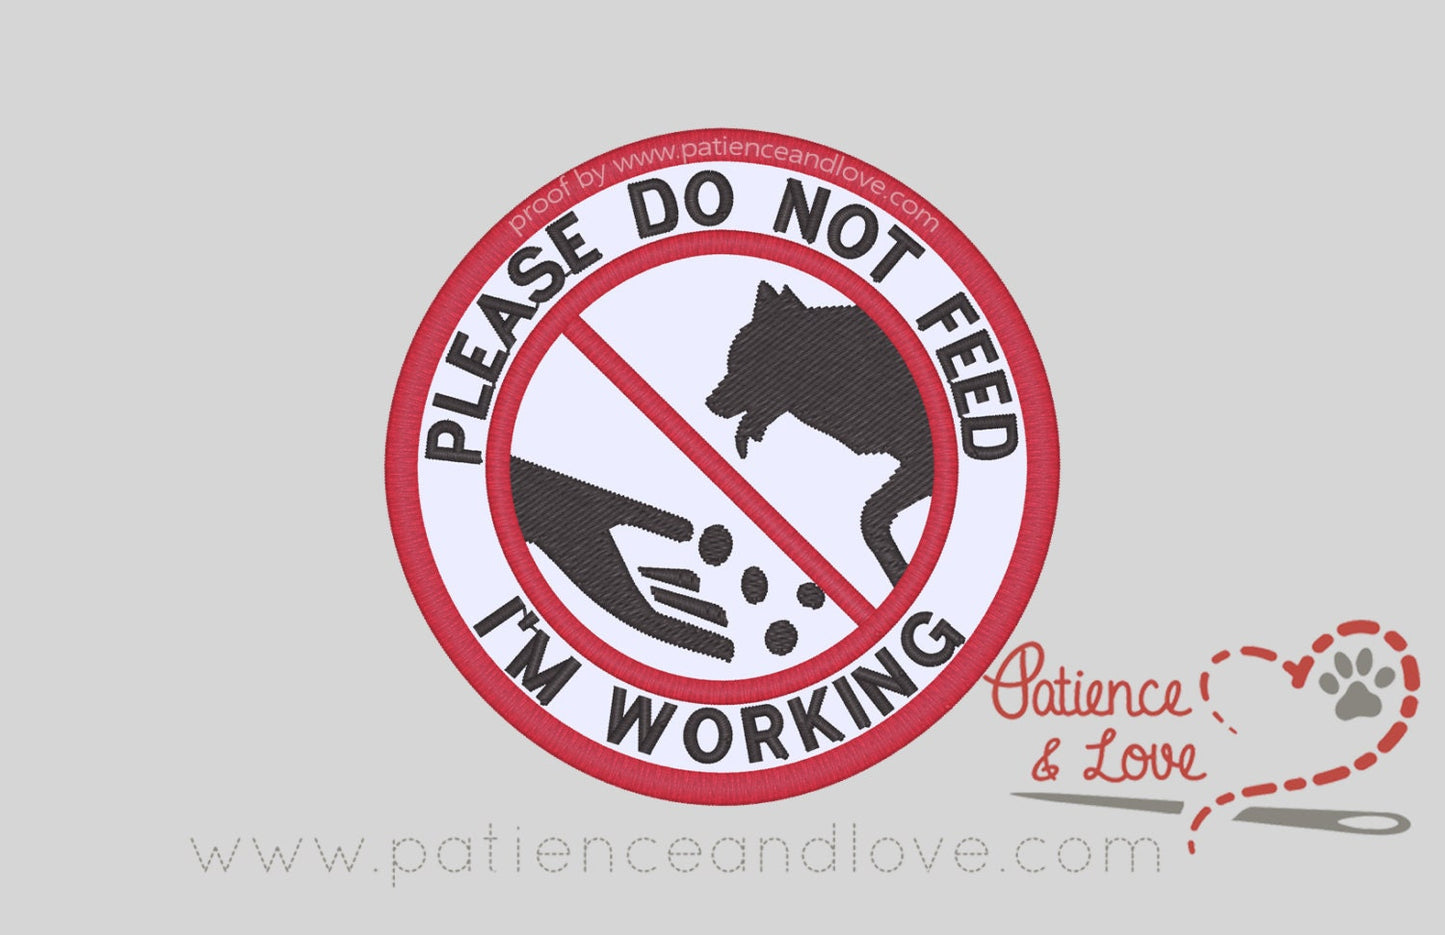 Please Do Not Feed - I'm Working, with dog and hand in center, 3 inch round patch